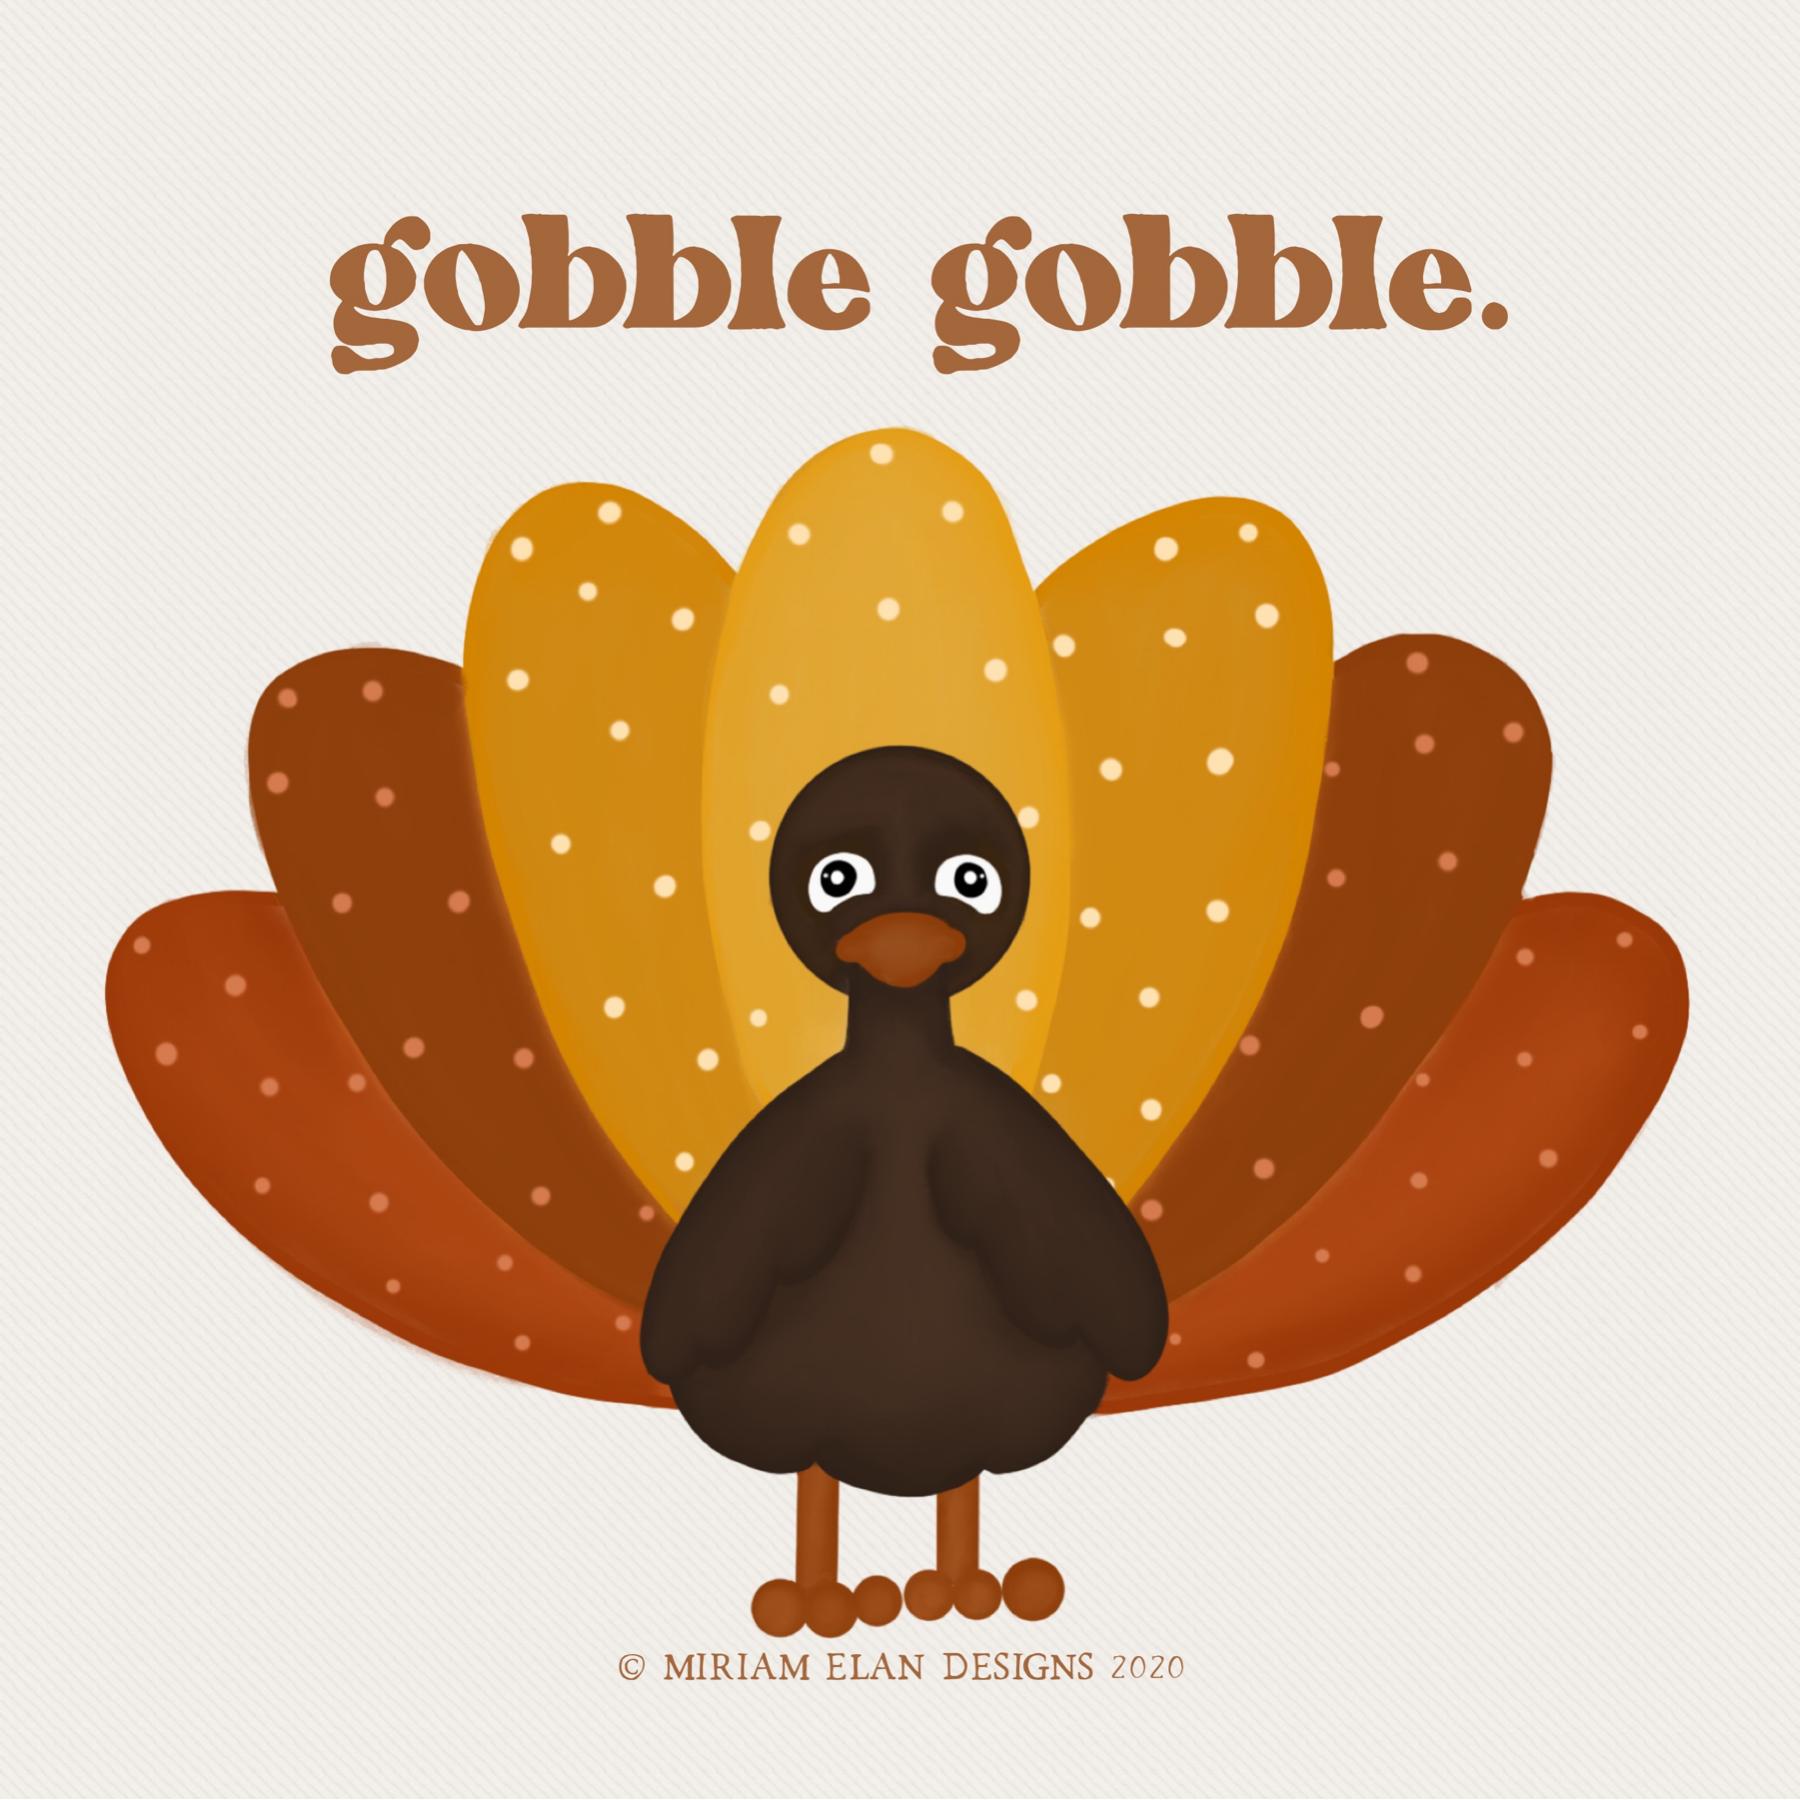 gobble. gobble. 🦃 
Just sharing some of my artwork! Keep an eye 👀 out for a new *cozy* winter sticker pack (by yours truly😉 lol) coming soon!!!!
What’s your favorite way to celebrate Thanksgiving? 